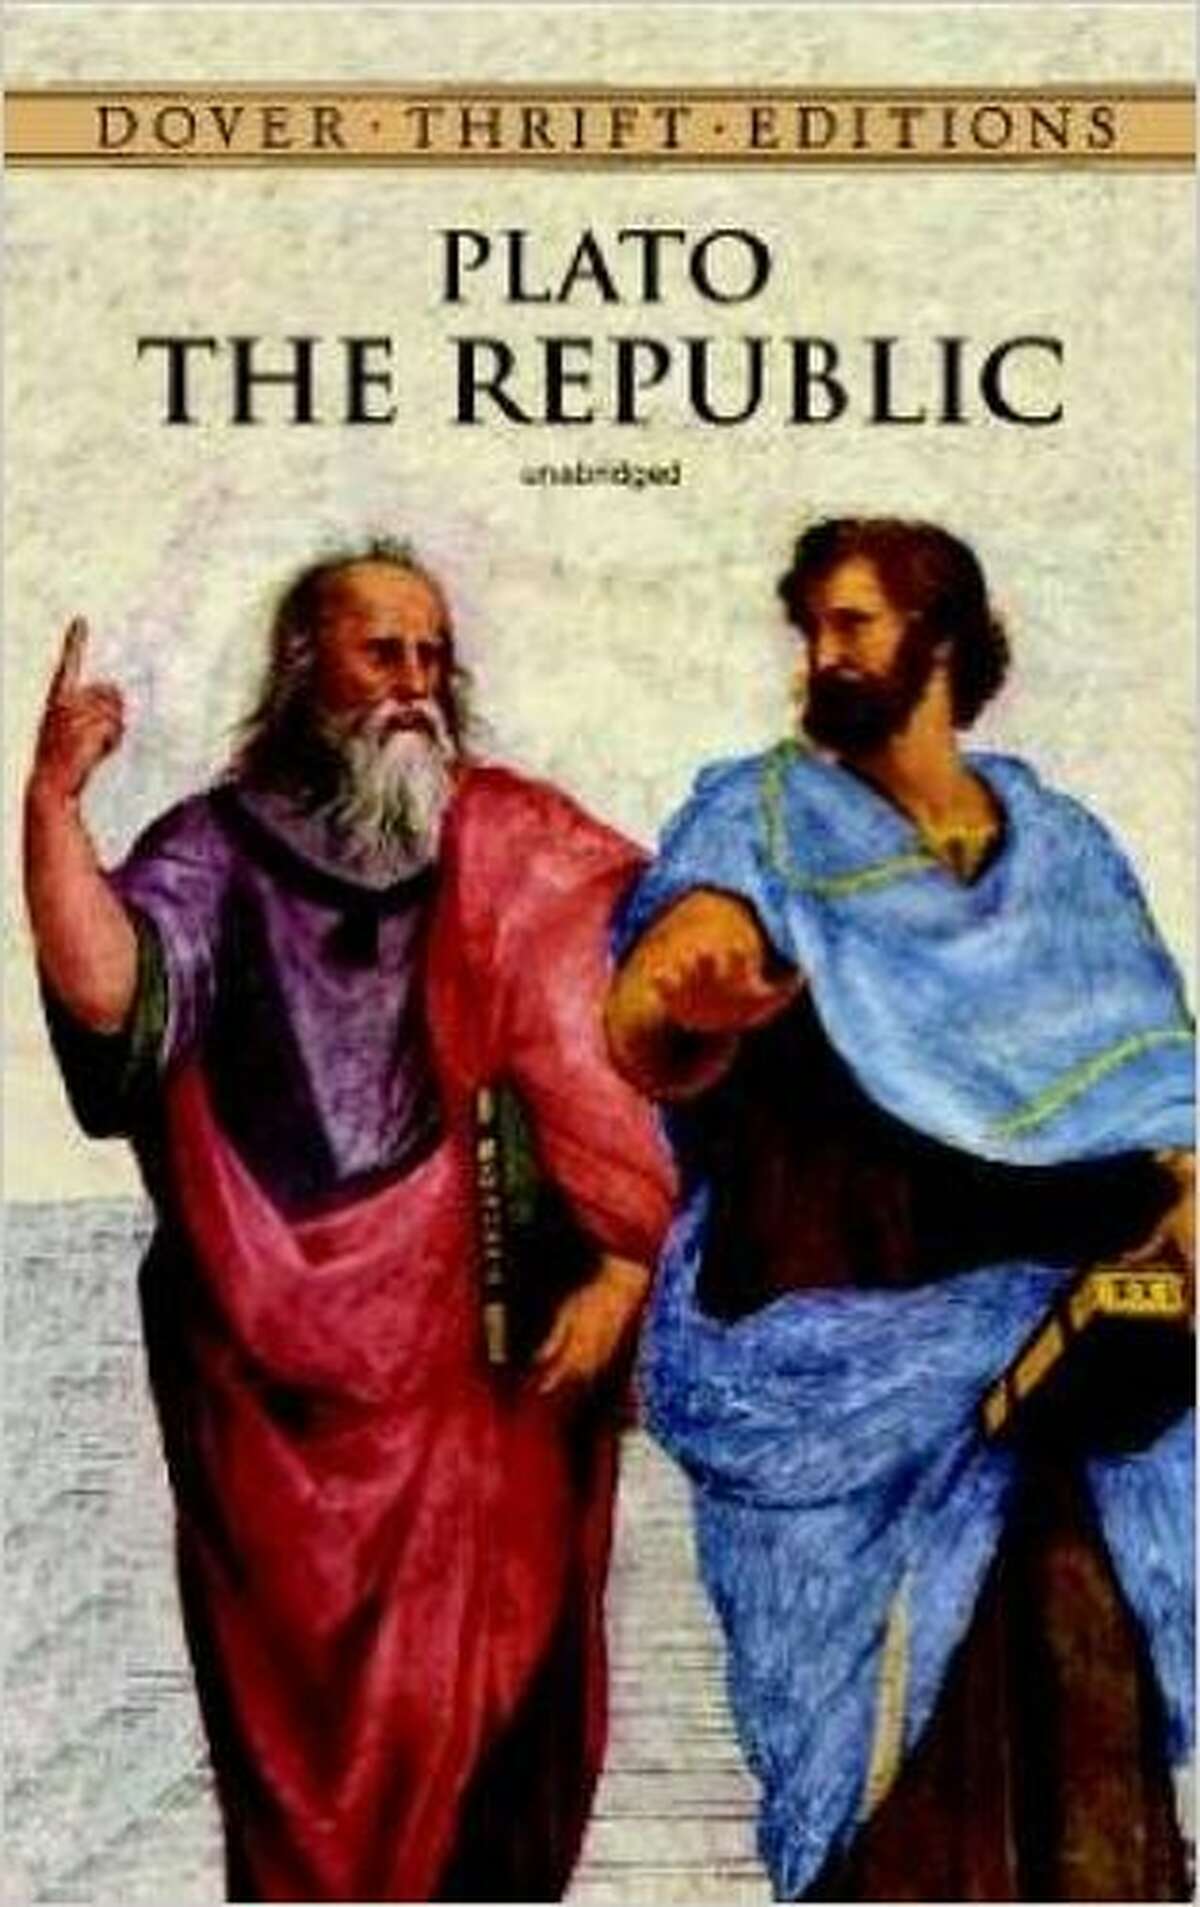 No. 2 – "The Republic" Assigned 3.573 times